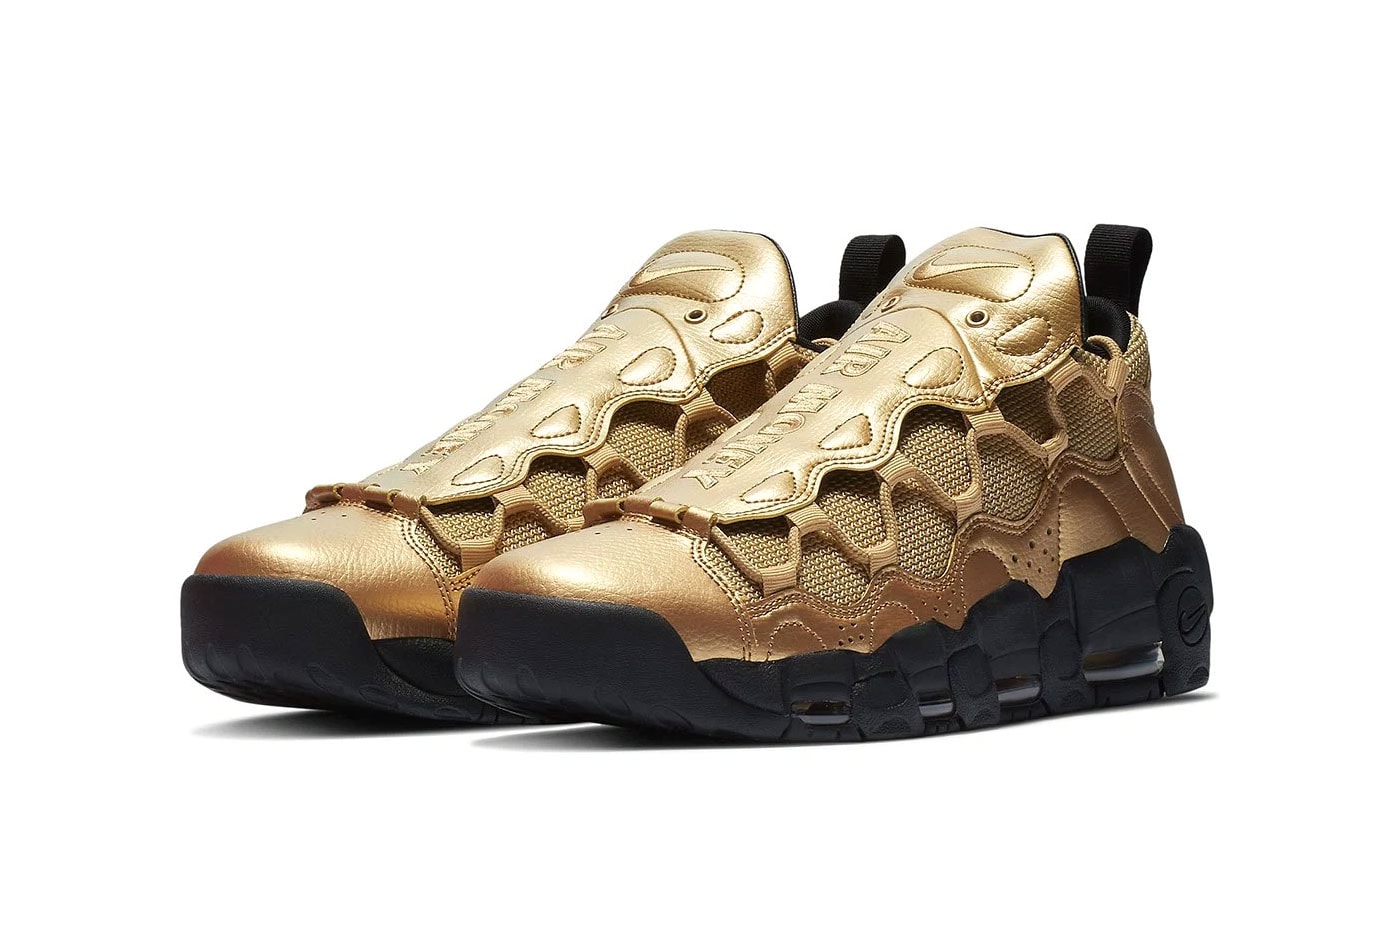 Nike Air More Money "Metallic Gold" Release Date october 2018 price colorway sneaker online buy purchase size